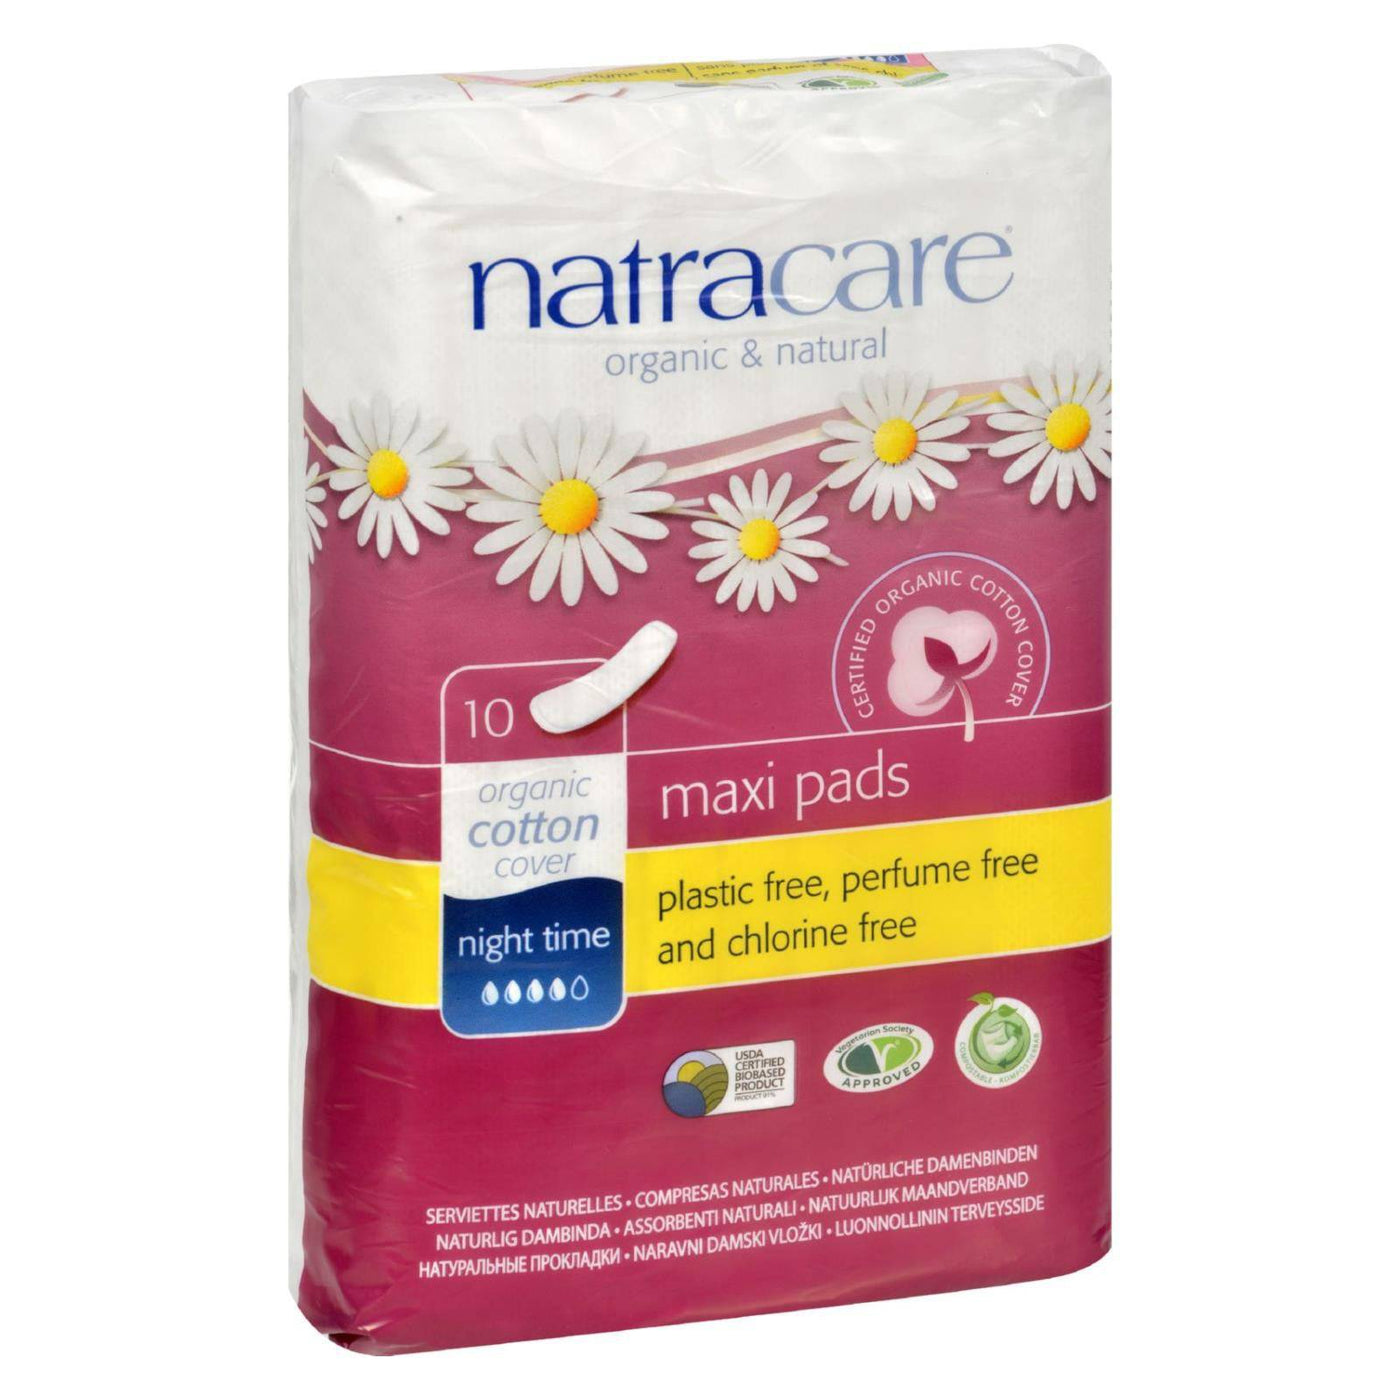 Buy Natracare Natural Night Time Pads - 10 Pack  at OnlyNaturals.us